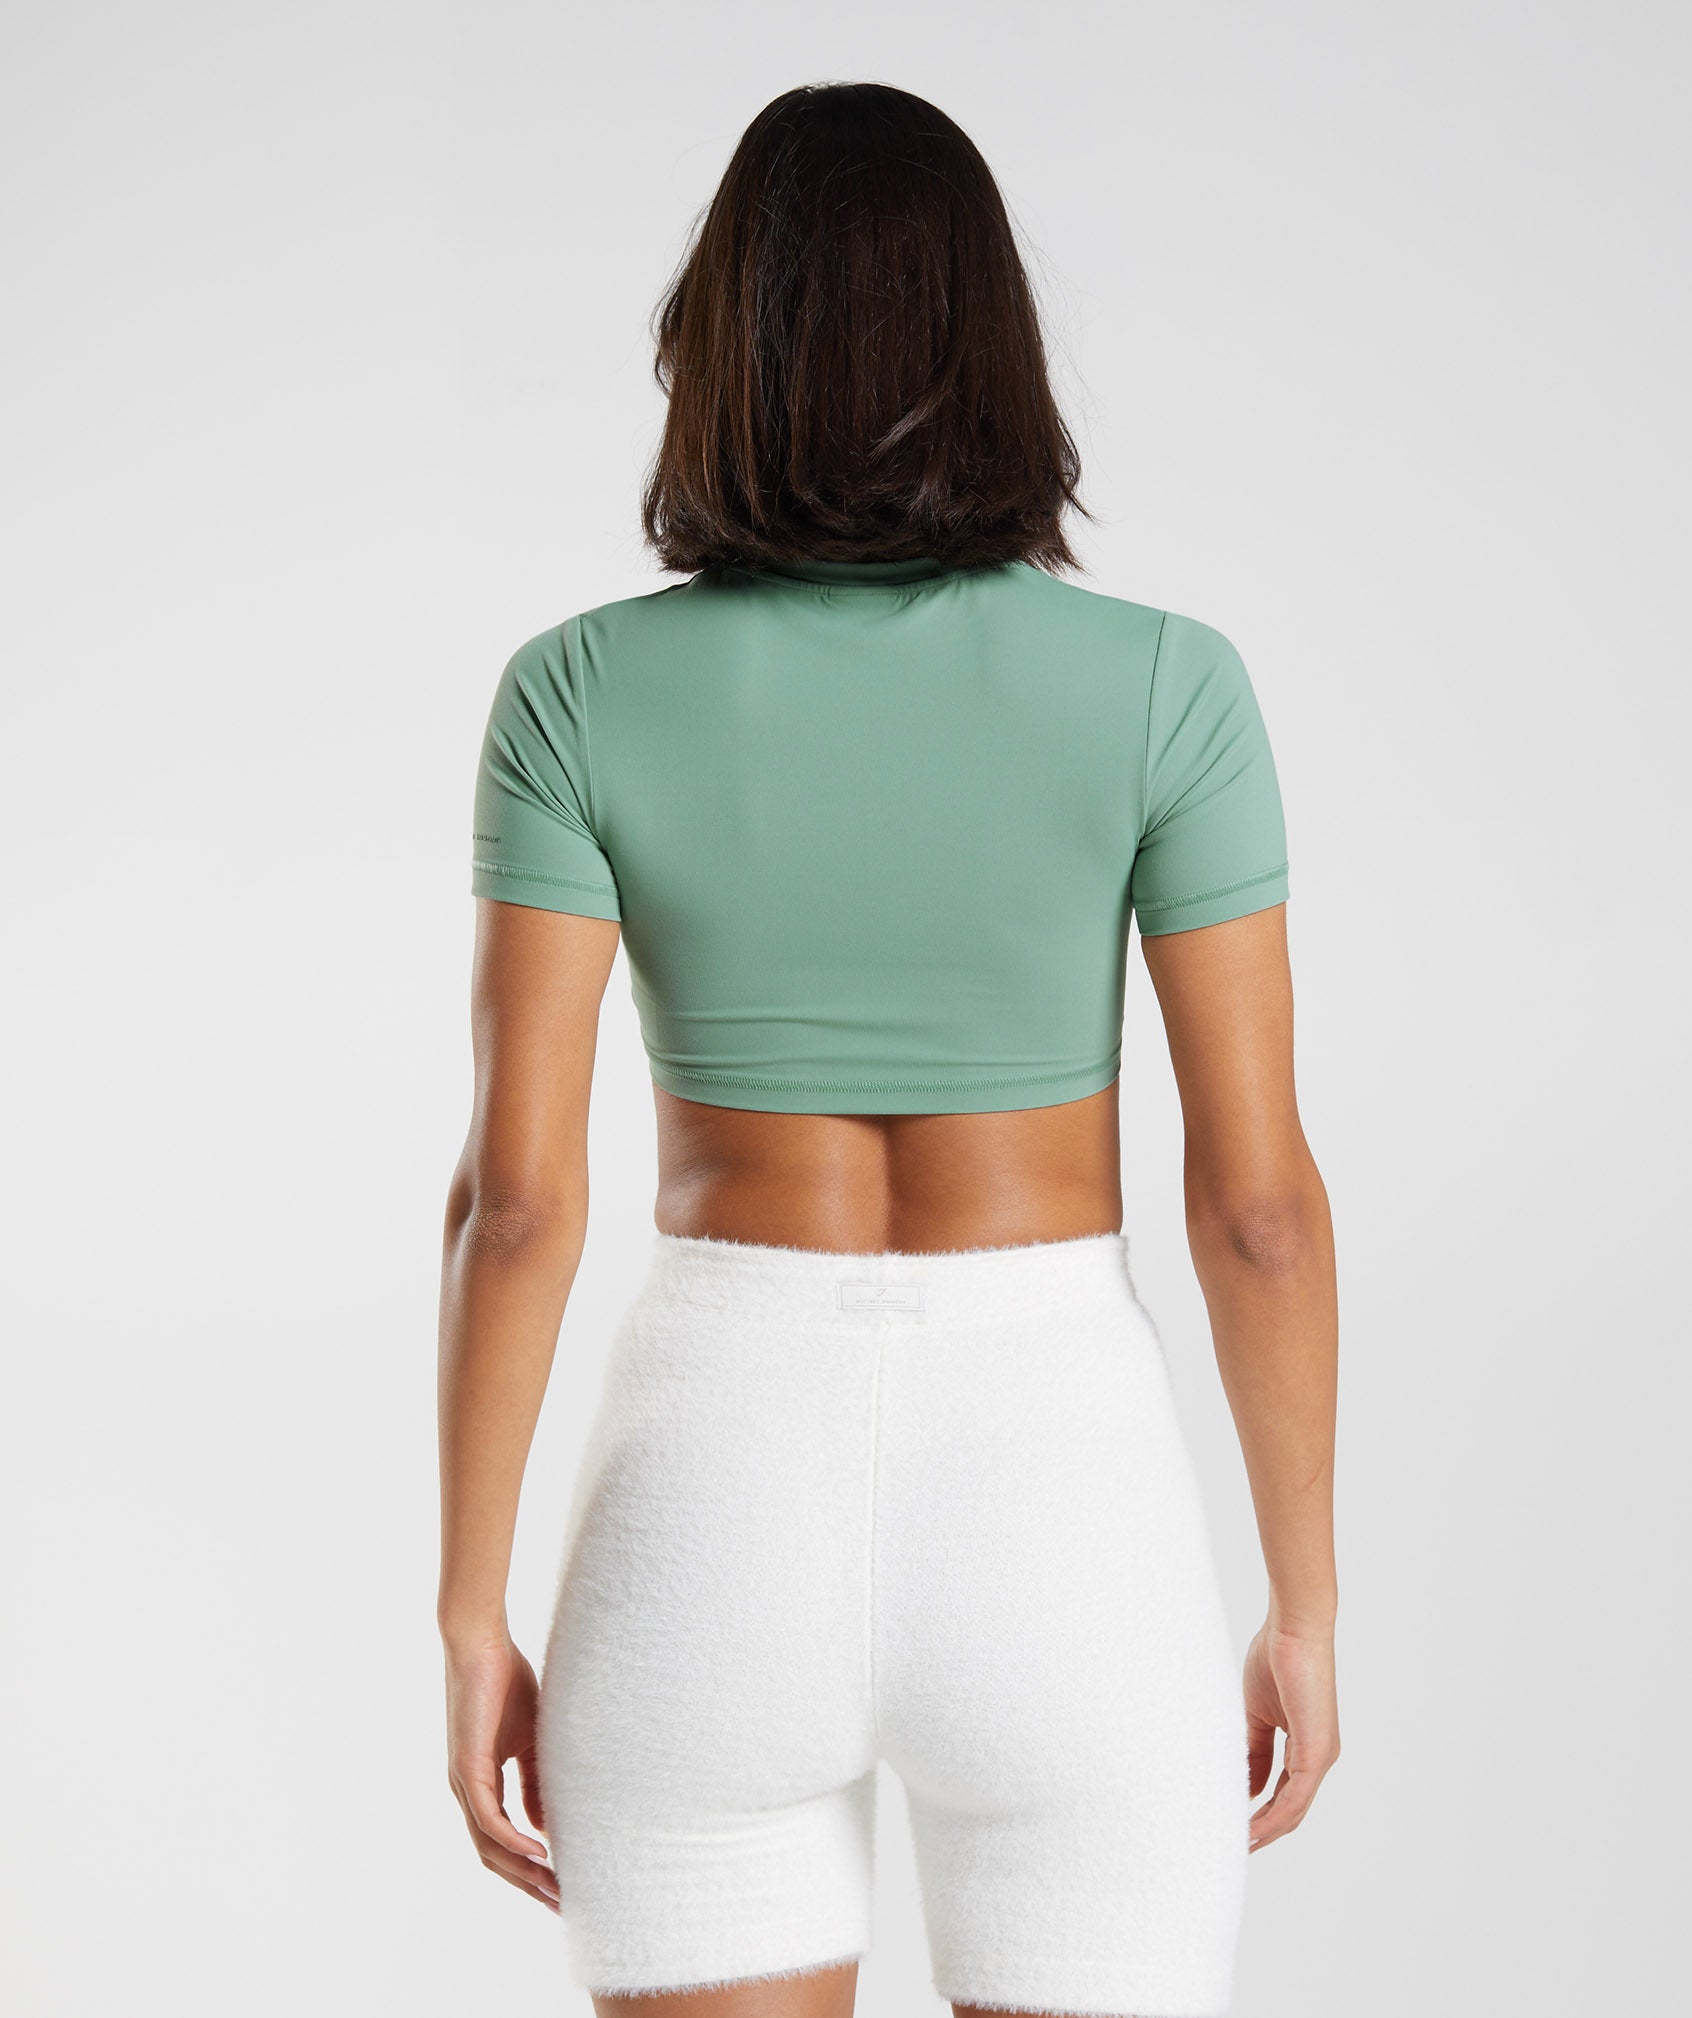 Whitney Short Sleeve Crop Top in Leaf Green